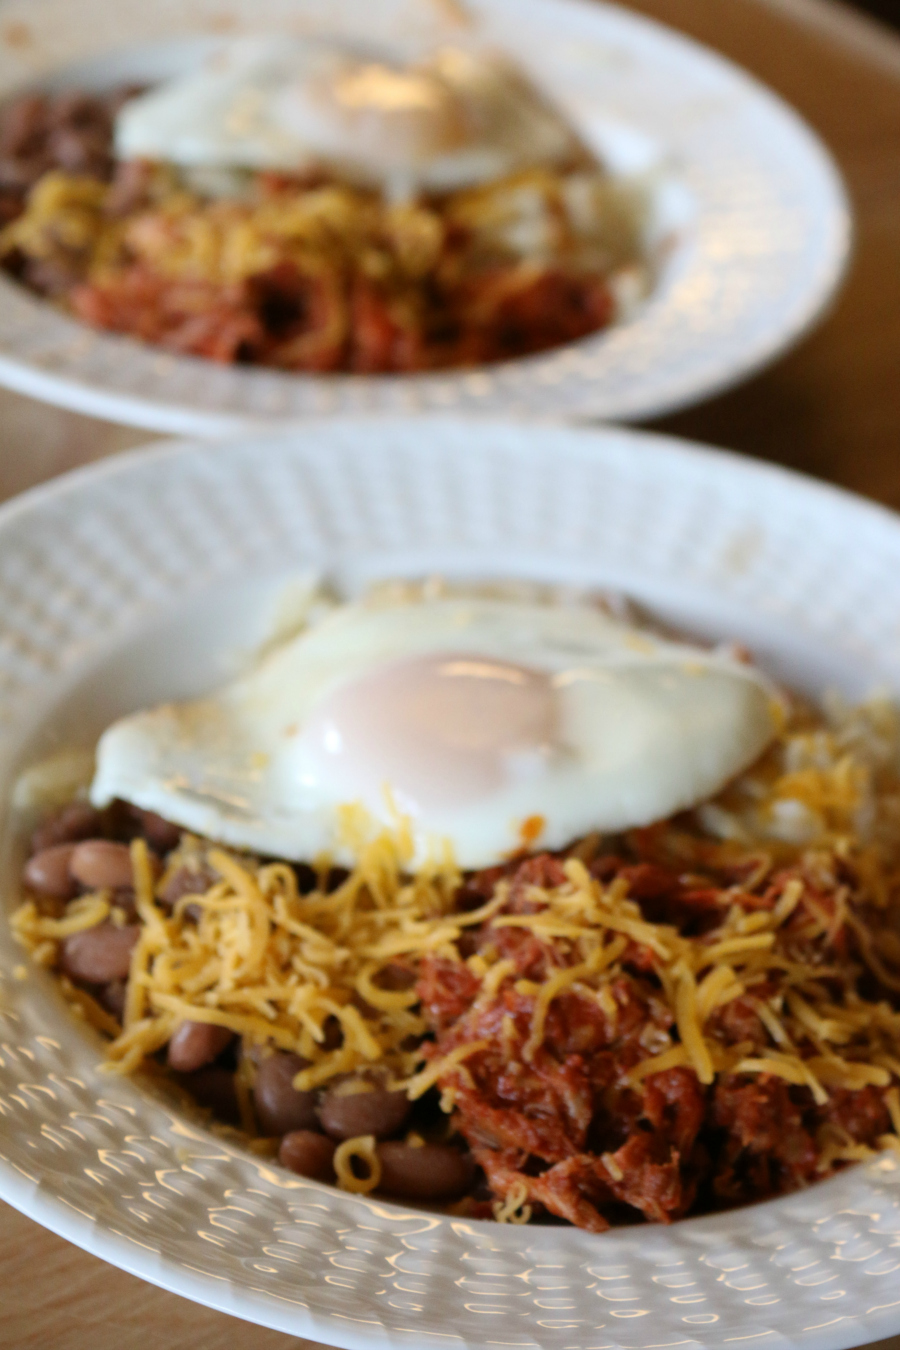 Carne Adovada Con Huevo - Carne Adovada Con Huevo - Pork marinated in Red Chile served beans, hash browns and a fried egg.